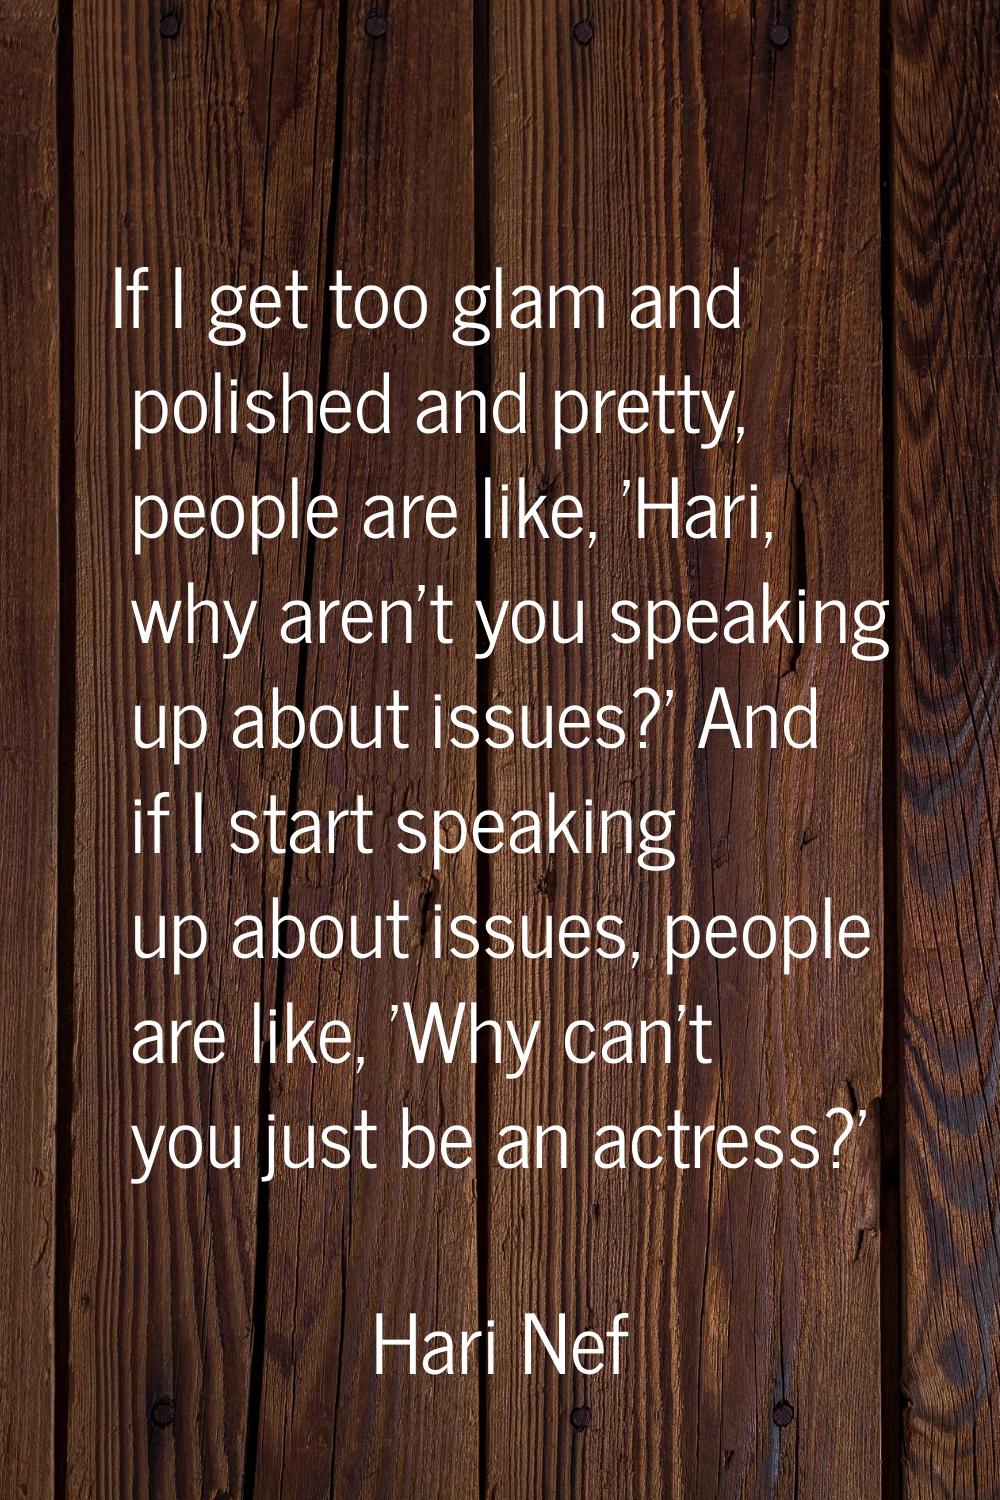 If I get too glam and polished and pretty, people are like, 'Hari, why aren't you speaking up about